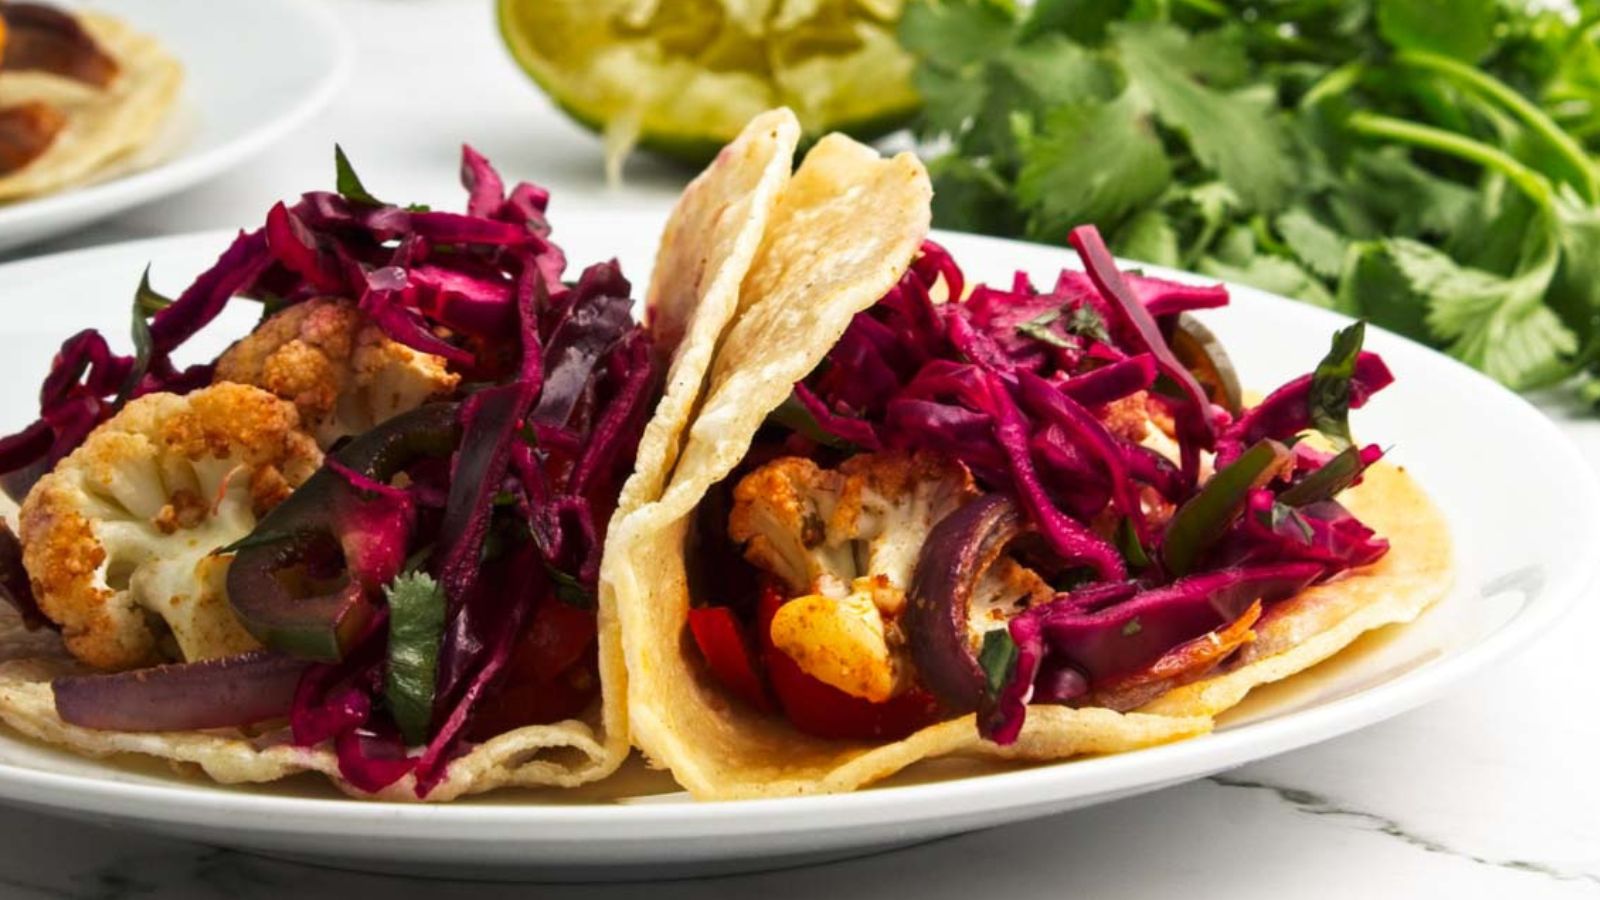 <p>These tacos pack a punch with spiced, roasted cauliflower at the helm, wrapped in a warm tortilla. Topped with a fresh slaw or avocado, they’re a testament to how flavorful and satisfying plant-based eating can be. It’s a game changer for Taco Tuesday, or any day, really.<br><strong>Get the Recipe: </strong><a href="https://twocityvegans.com/roasted-cauliflower-tacos/?utm_source=msn&utm_medium=page&utm_campaign=msn" rel="noopener">Roasted Cauliflower Tacos</a></p>